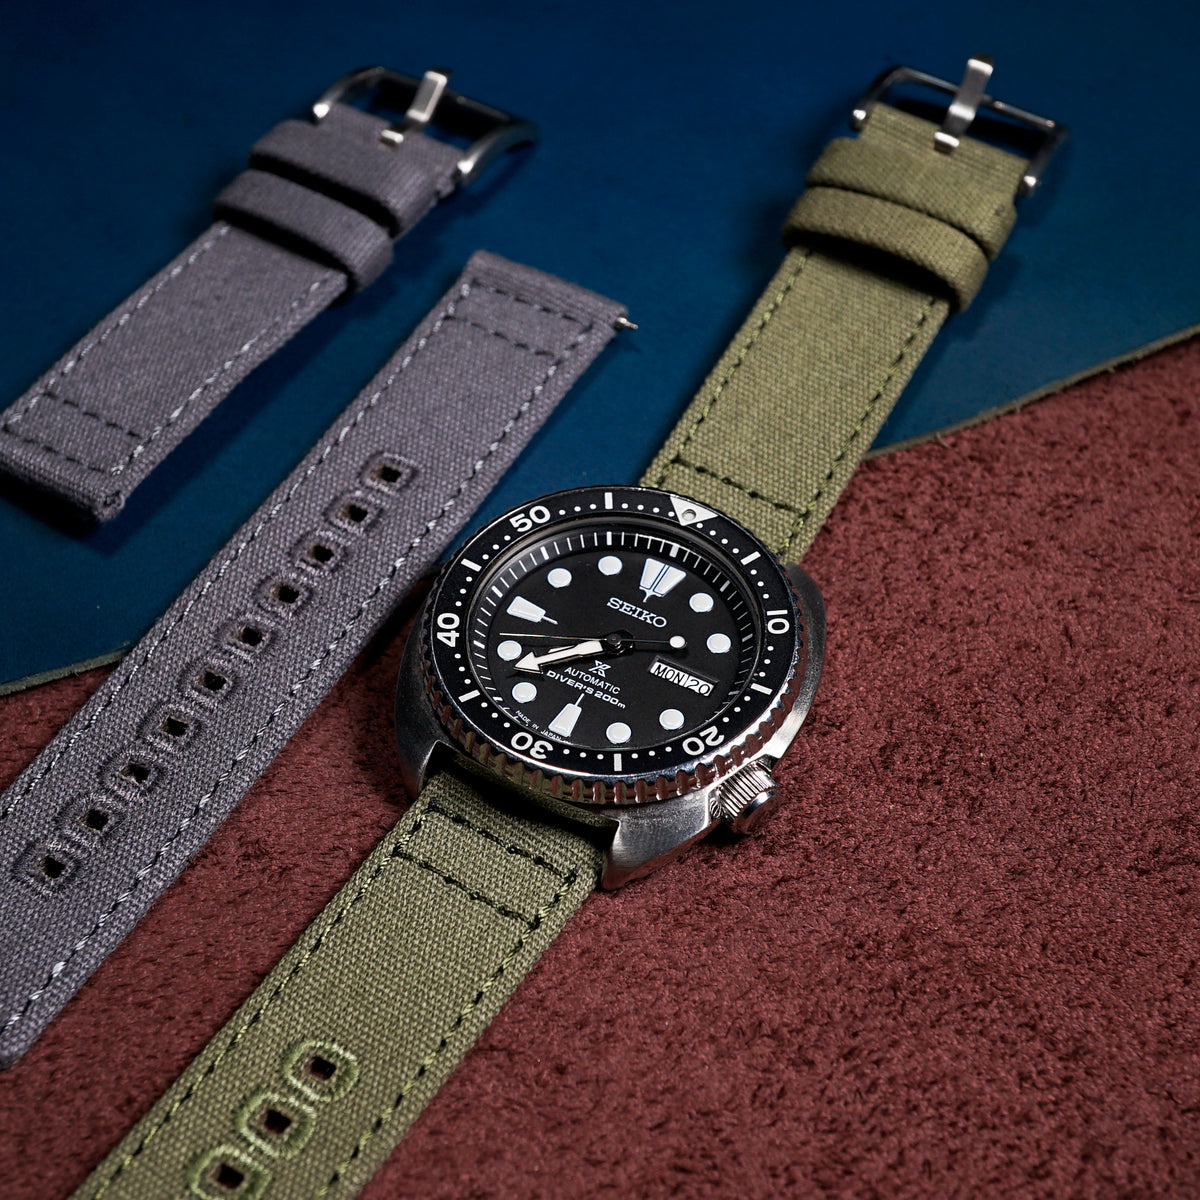 Quick Release Canvas Watch Strap in Olive